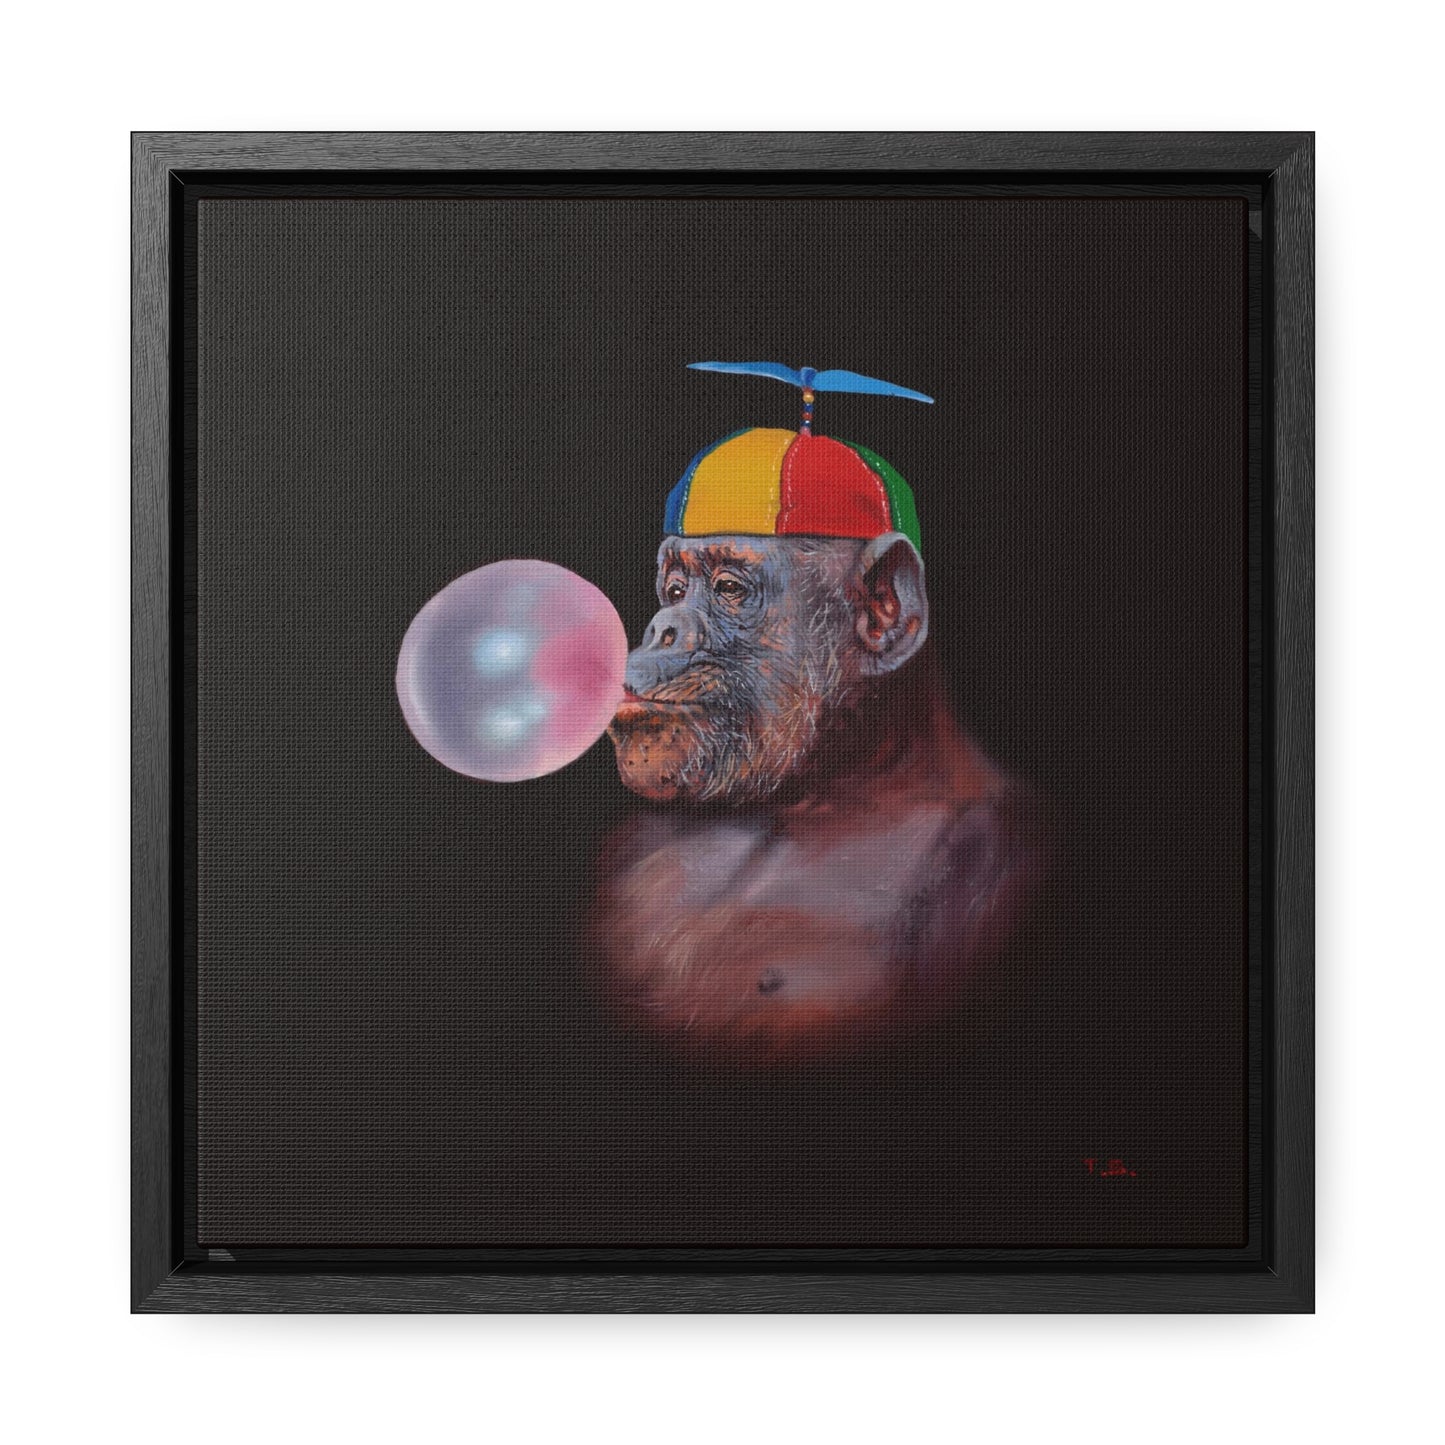 Tony South: "Inflate" - Framed Canvas Reproduction